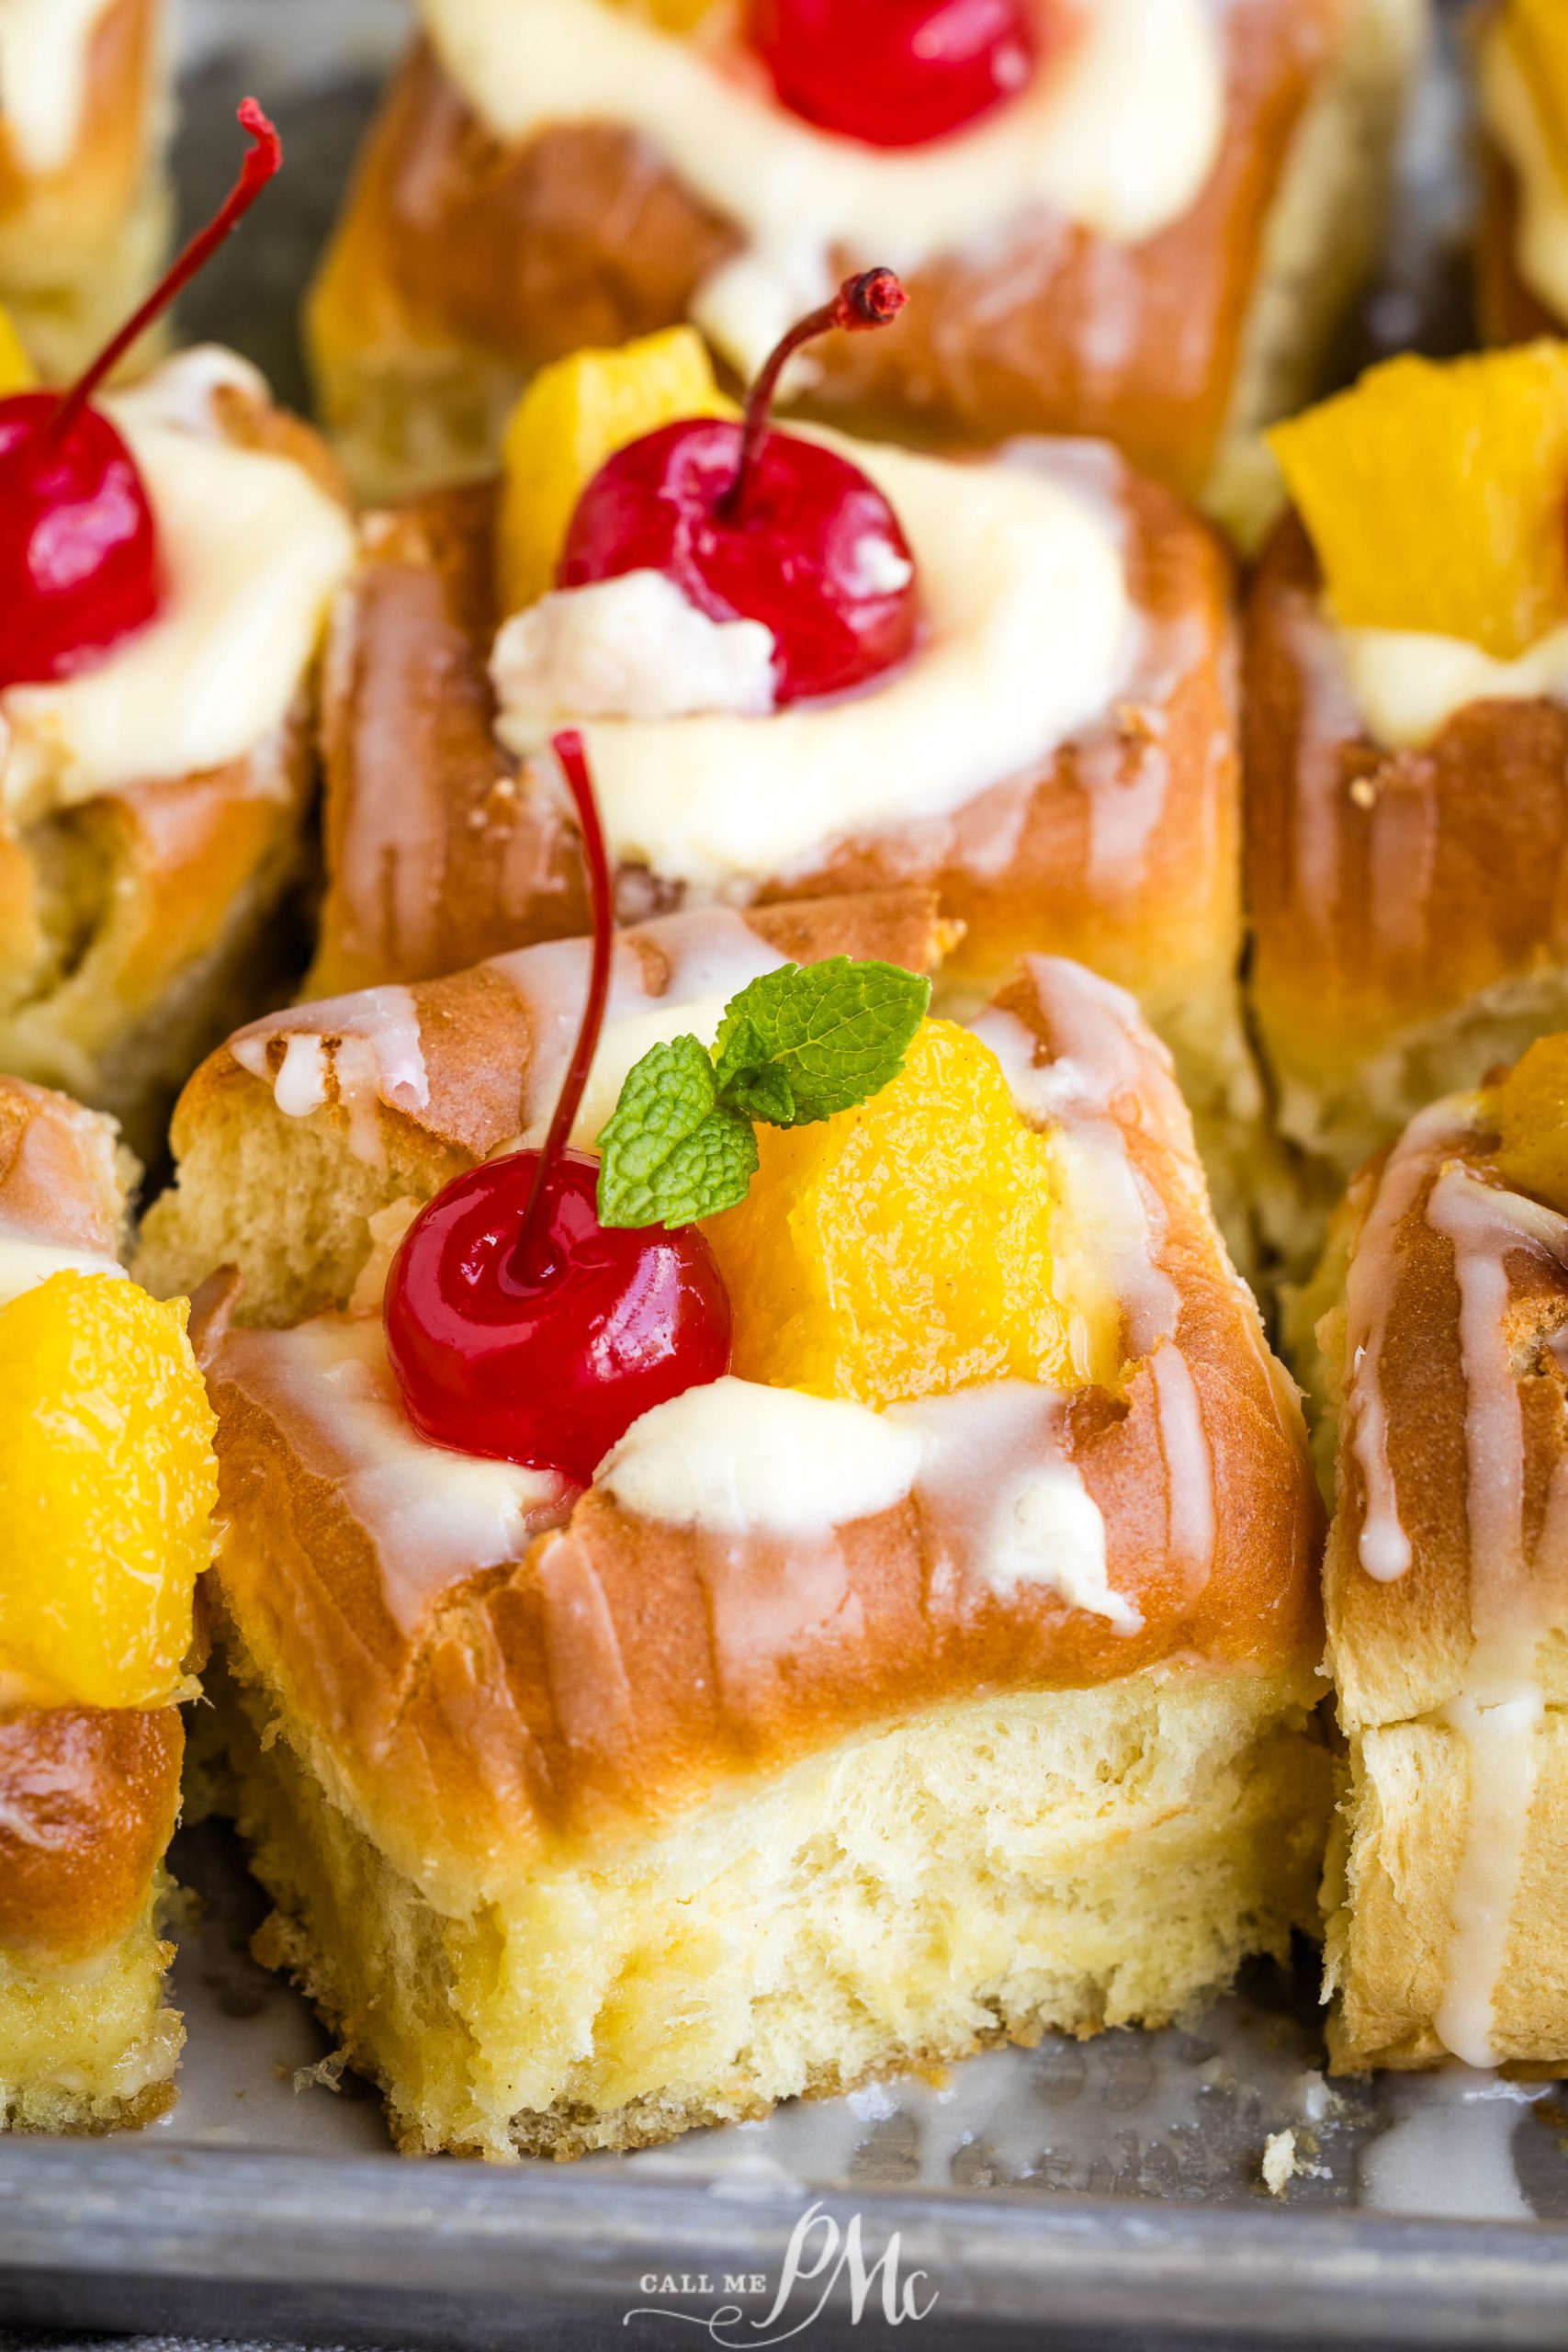 Sliced Pina Colada Cheesecake Danish topped with cream, candied fruit, and a cherry garnish.